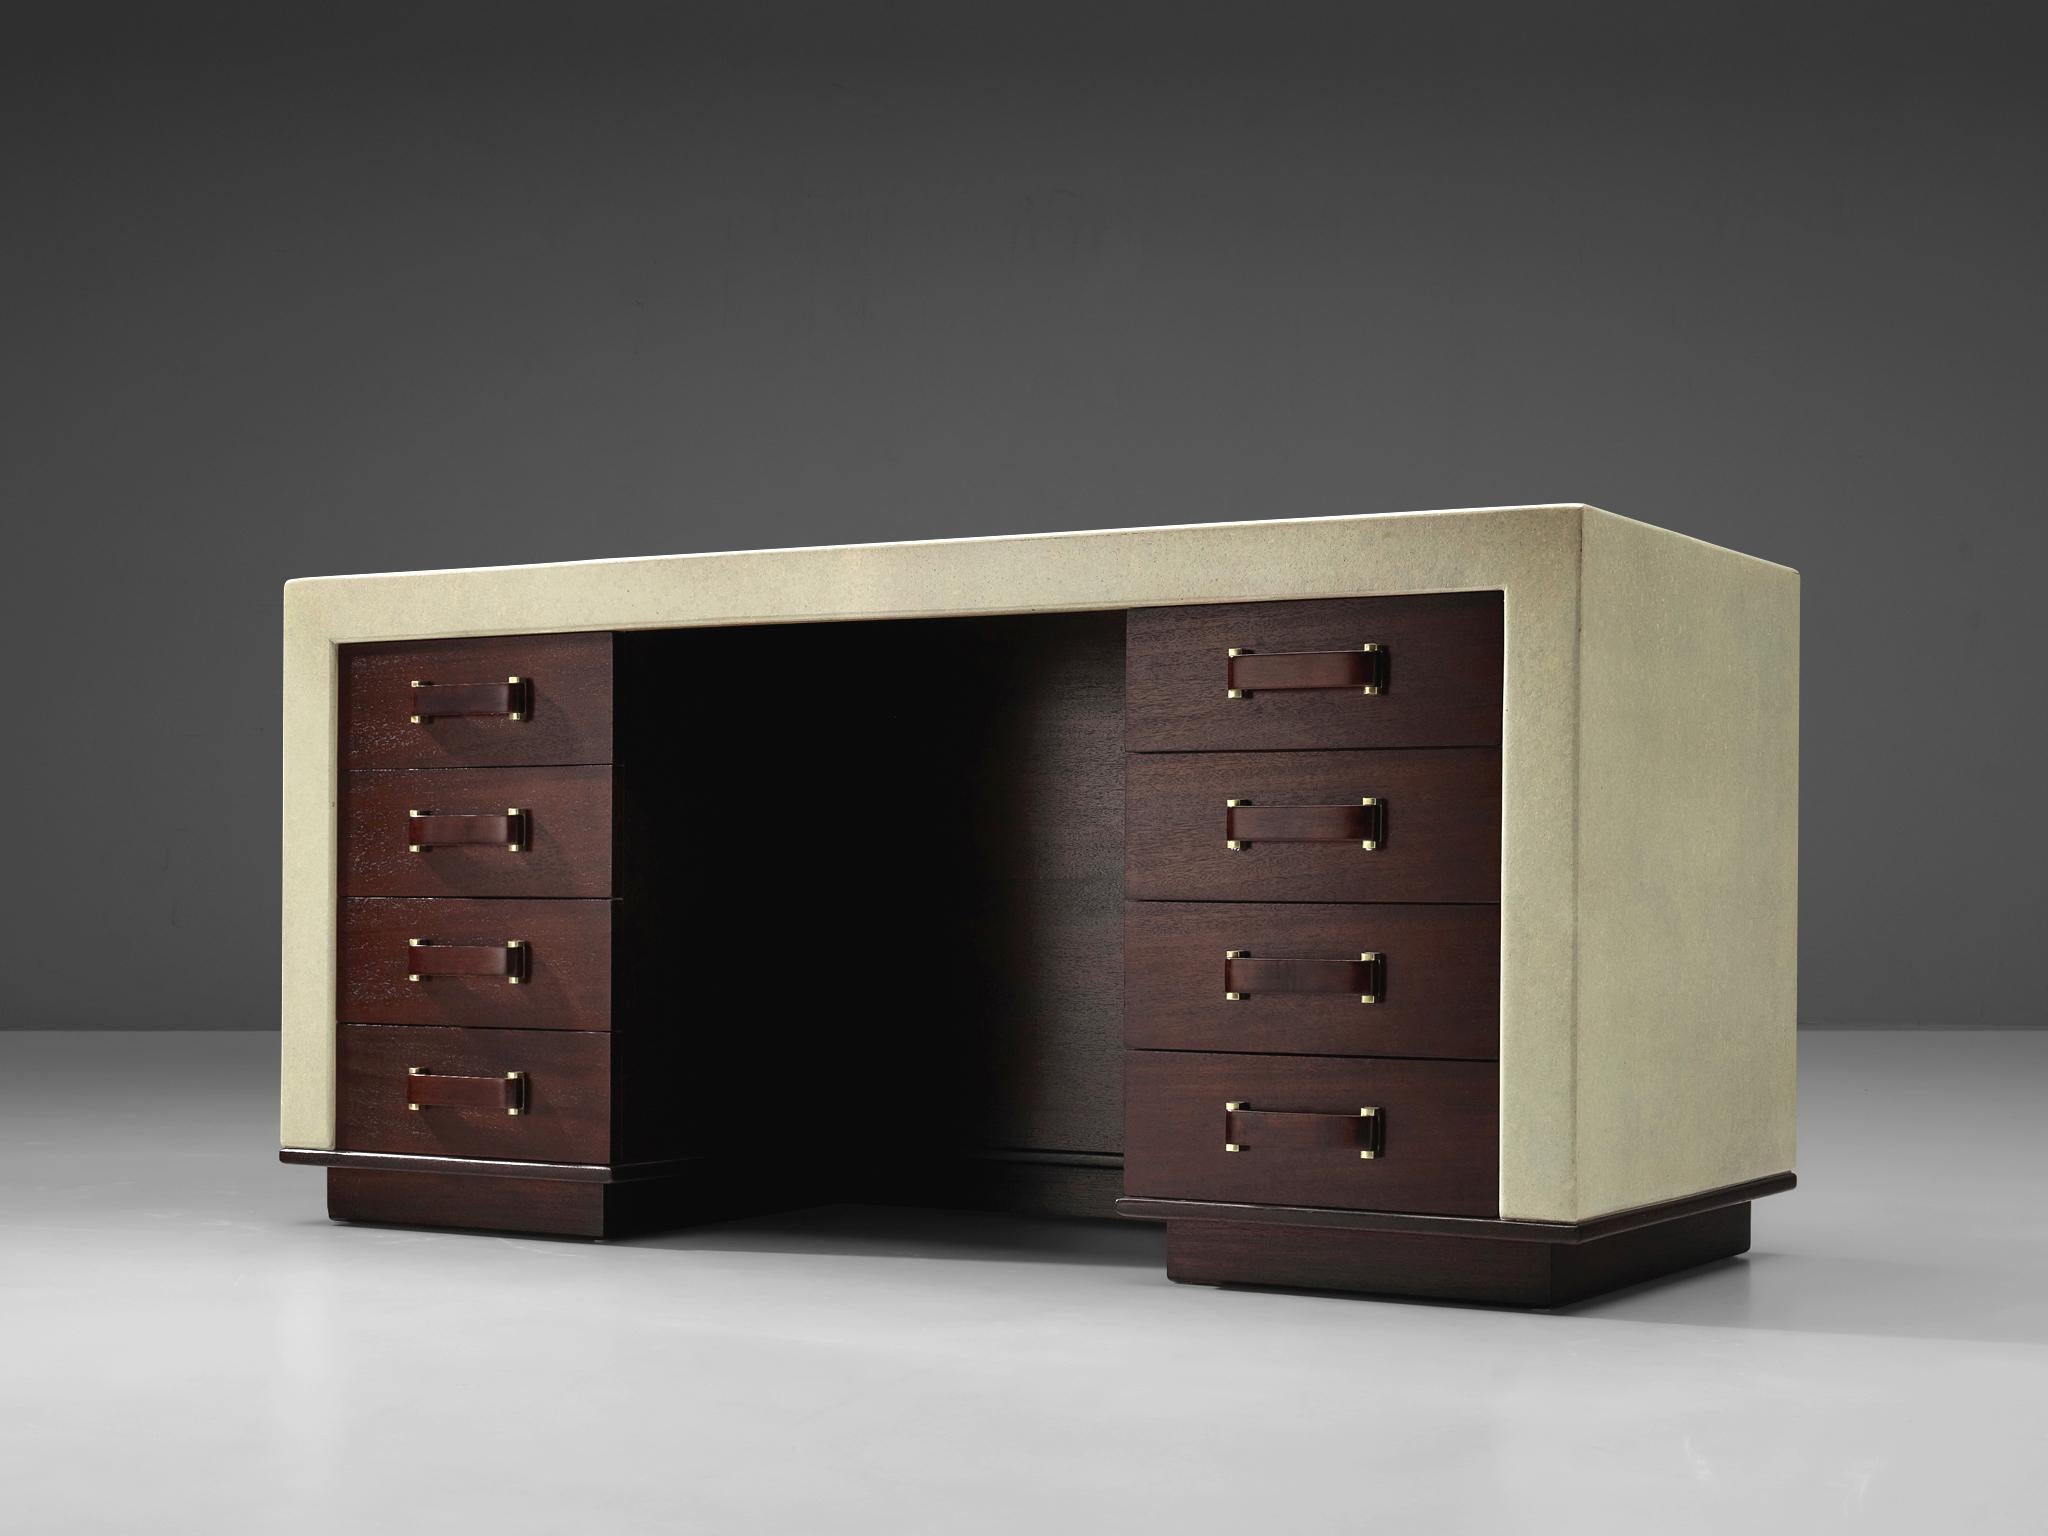 Paul Frankl for Johnson Furniture, free-standing desk, cork, mahogany, brass, United States, 1940s. 

This rare piece shows an exquisite construction based on a cubic shape executed in beautiful materials. The tabletop is made of cork which